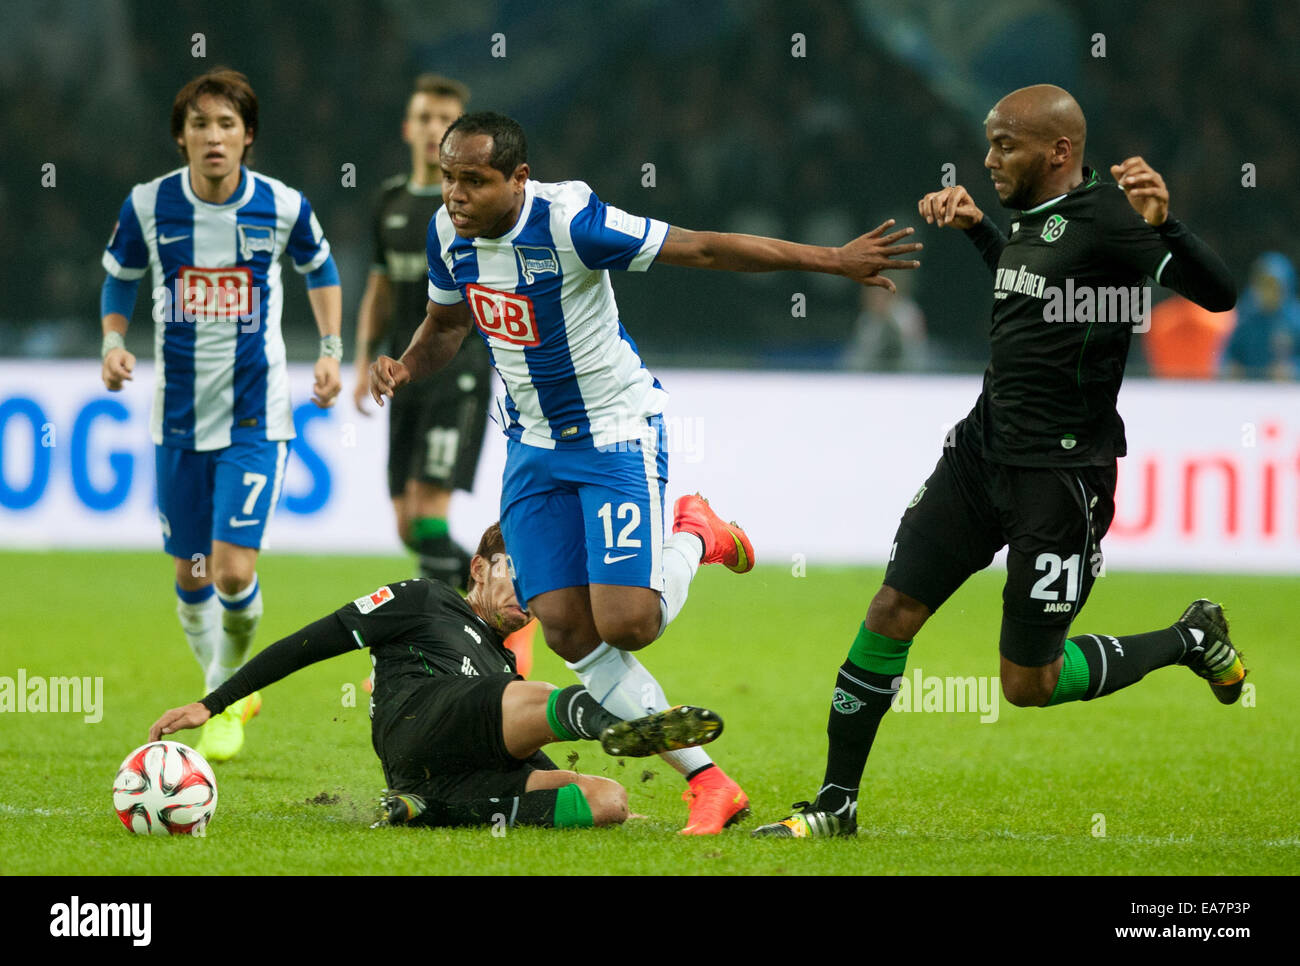 Berlin, Germany. 07th Nov, 2014. Hertha BSC's Ronny (C) and Hannover 96's Hiroshi Kiyotake (L) and Jimmy Briand (R) during the German Bundesliga match between Herta BSC and Hannover 96 at the Olympic Stadium in Berlin, Germany, 07 November 2014. Photo: OLIVER MEHLIS/dpa/Alamy Live News Stock Photo